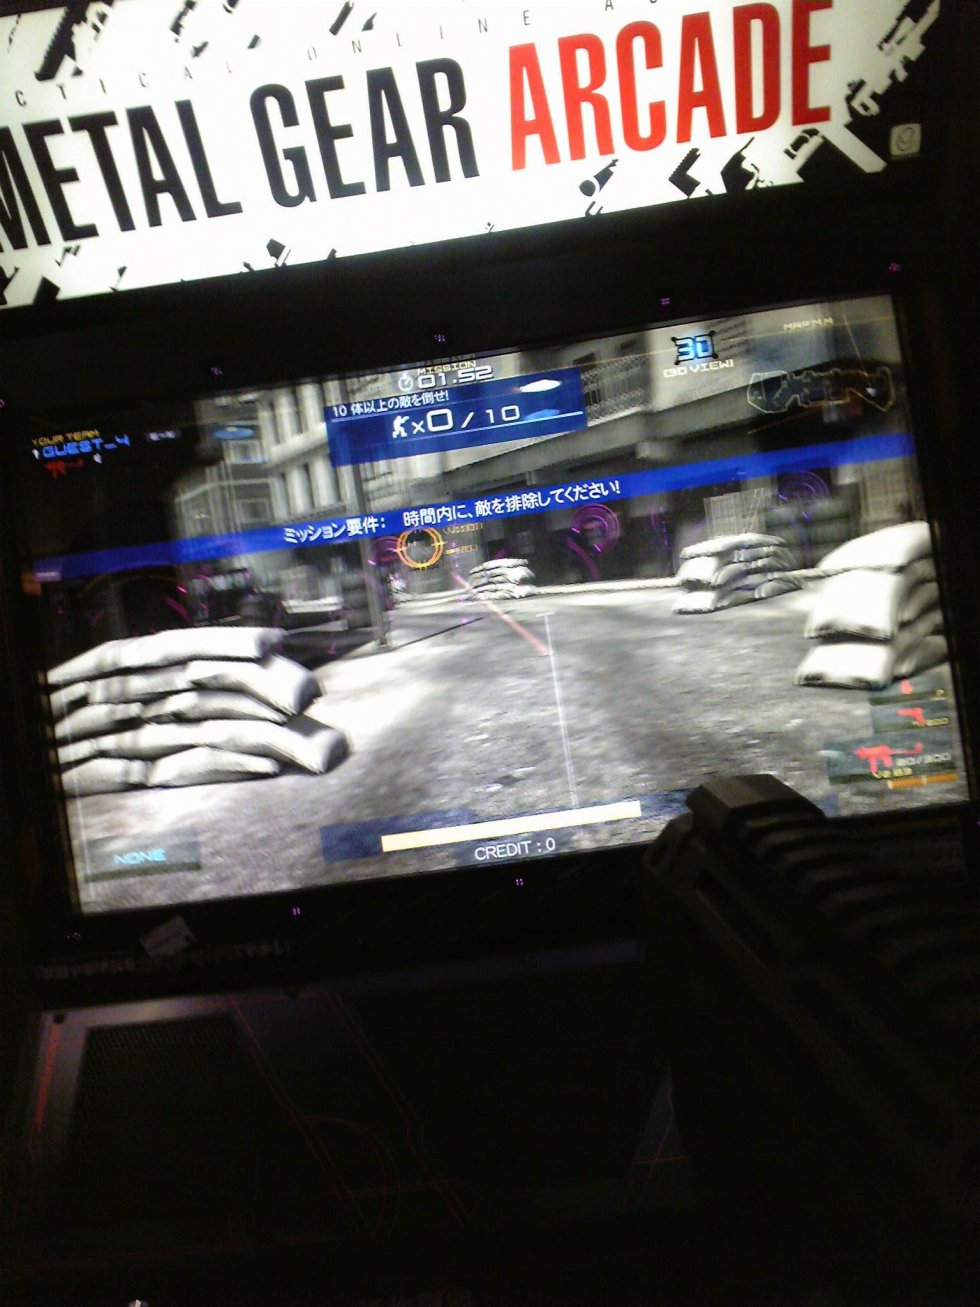 3DS-live-japon-arcade-mgs2